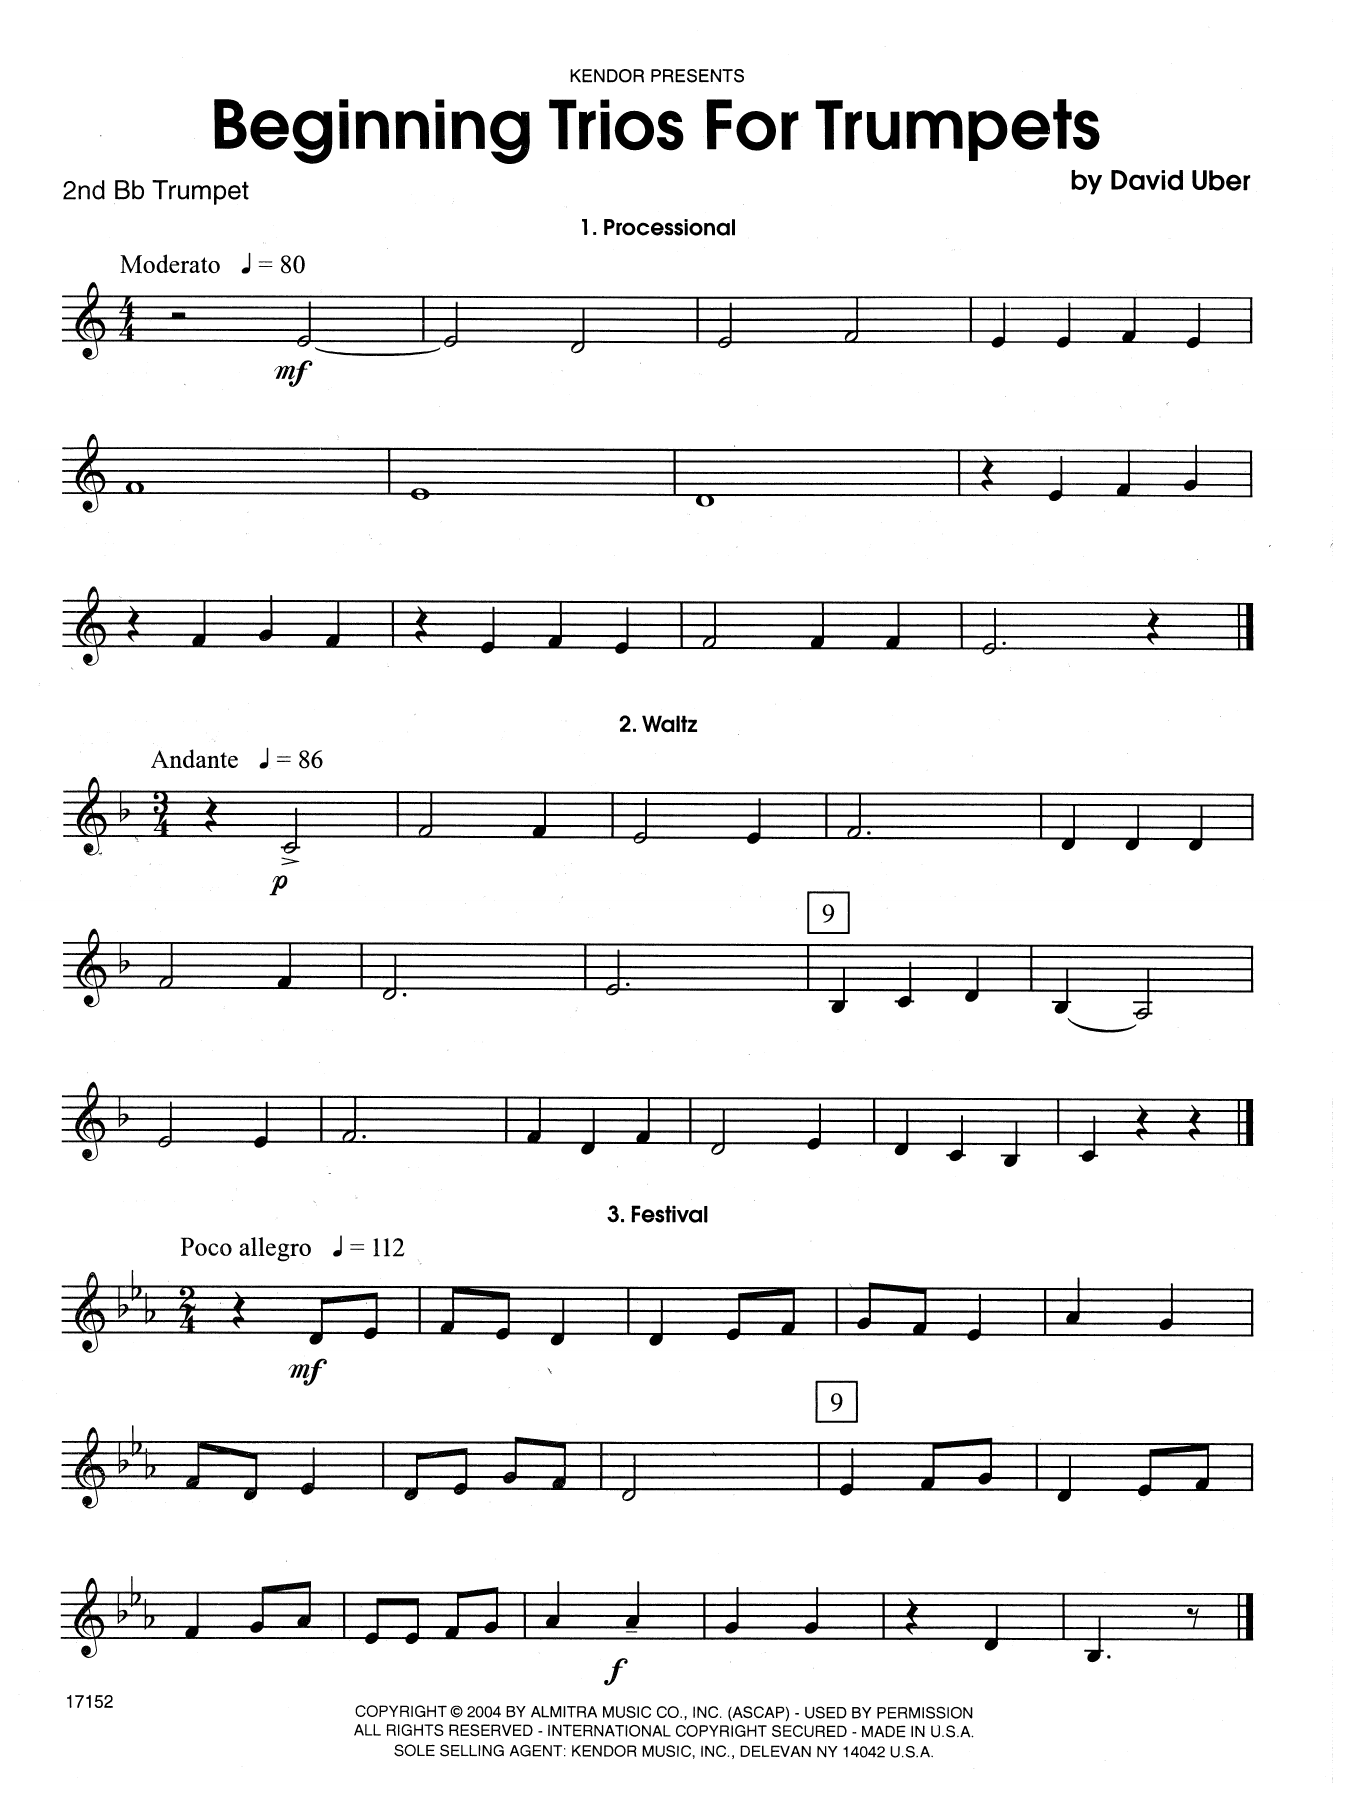 David Uber Beginning Trios For Trumpets - 2nd Bb Trumpet sheet music notes and chords. Download Printable PDF.